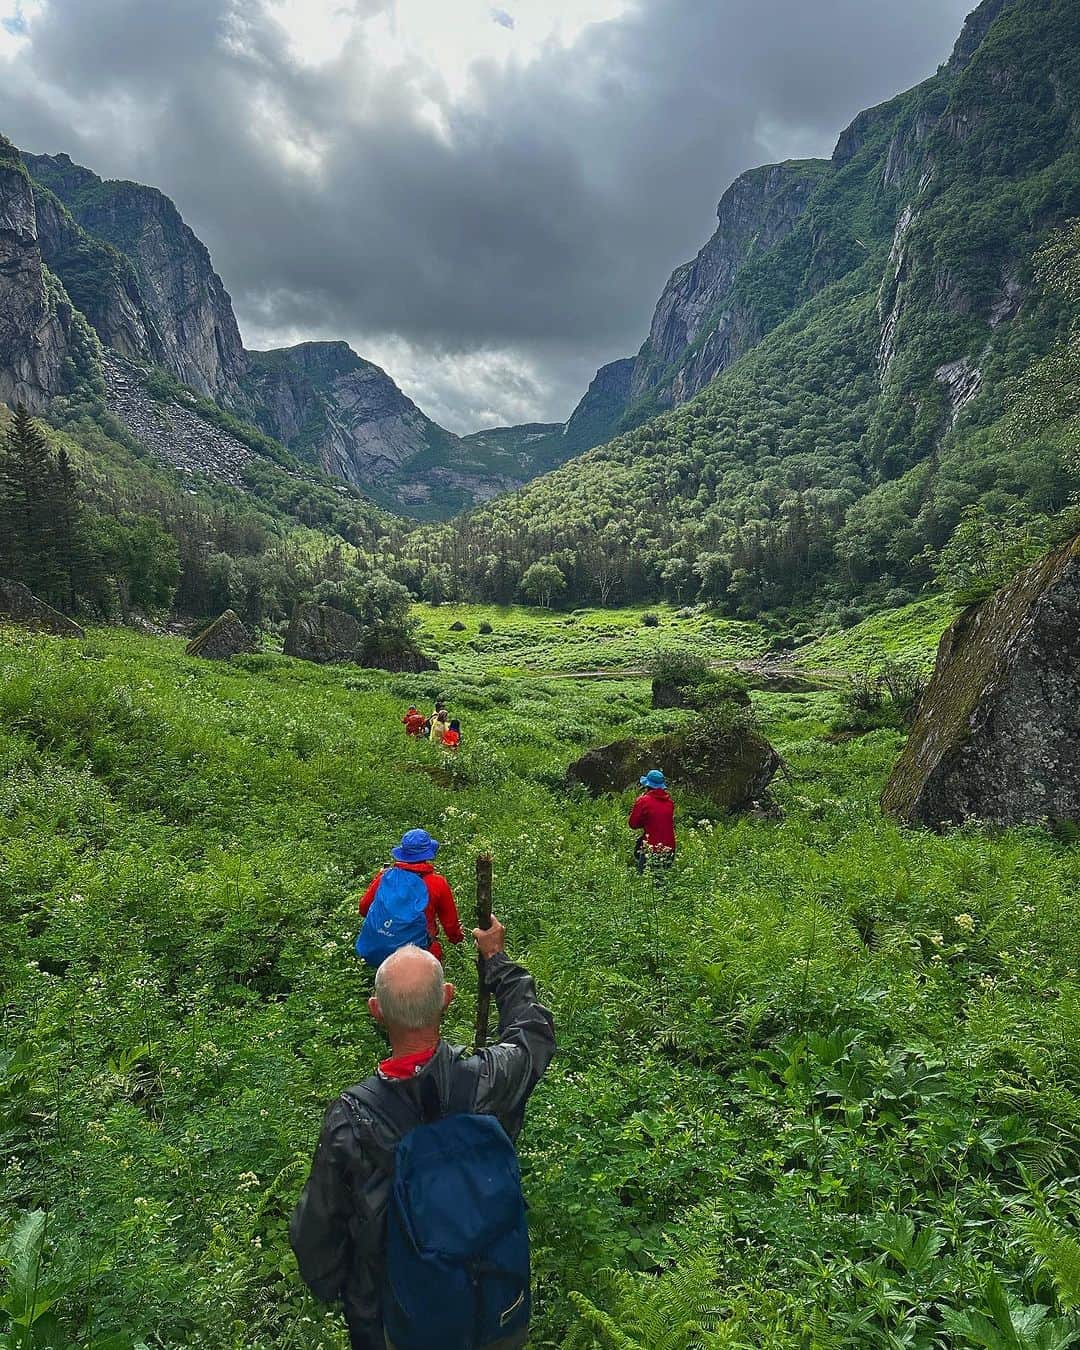 Explore Canadaのインスタグラム：「Welcome to Jurassic Park! 🦖  JK. You may not find dinosaurs here but the journey through Moose Meadows on the Western Brook Pond Gorge trail will make you feel like you’ve stepped back in time to the Jurassic era.  The @outeastadventures guides are head over heels for this trail, and for good reason. Head into the forest, through rivers, past waterfalls and up embankments to be rewarded with the most stunning of valley views 😍.  📷: @outeastadventures 📍: Moose Meadow, Western Brook Pond, @newfoundlandlabrador  #ExploreCanada #ExploreNL  Image description: A line of hikers walk through a lush green meadow with towering rockfaces and mountains on each side.」